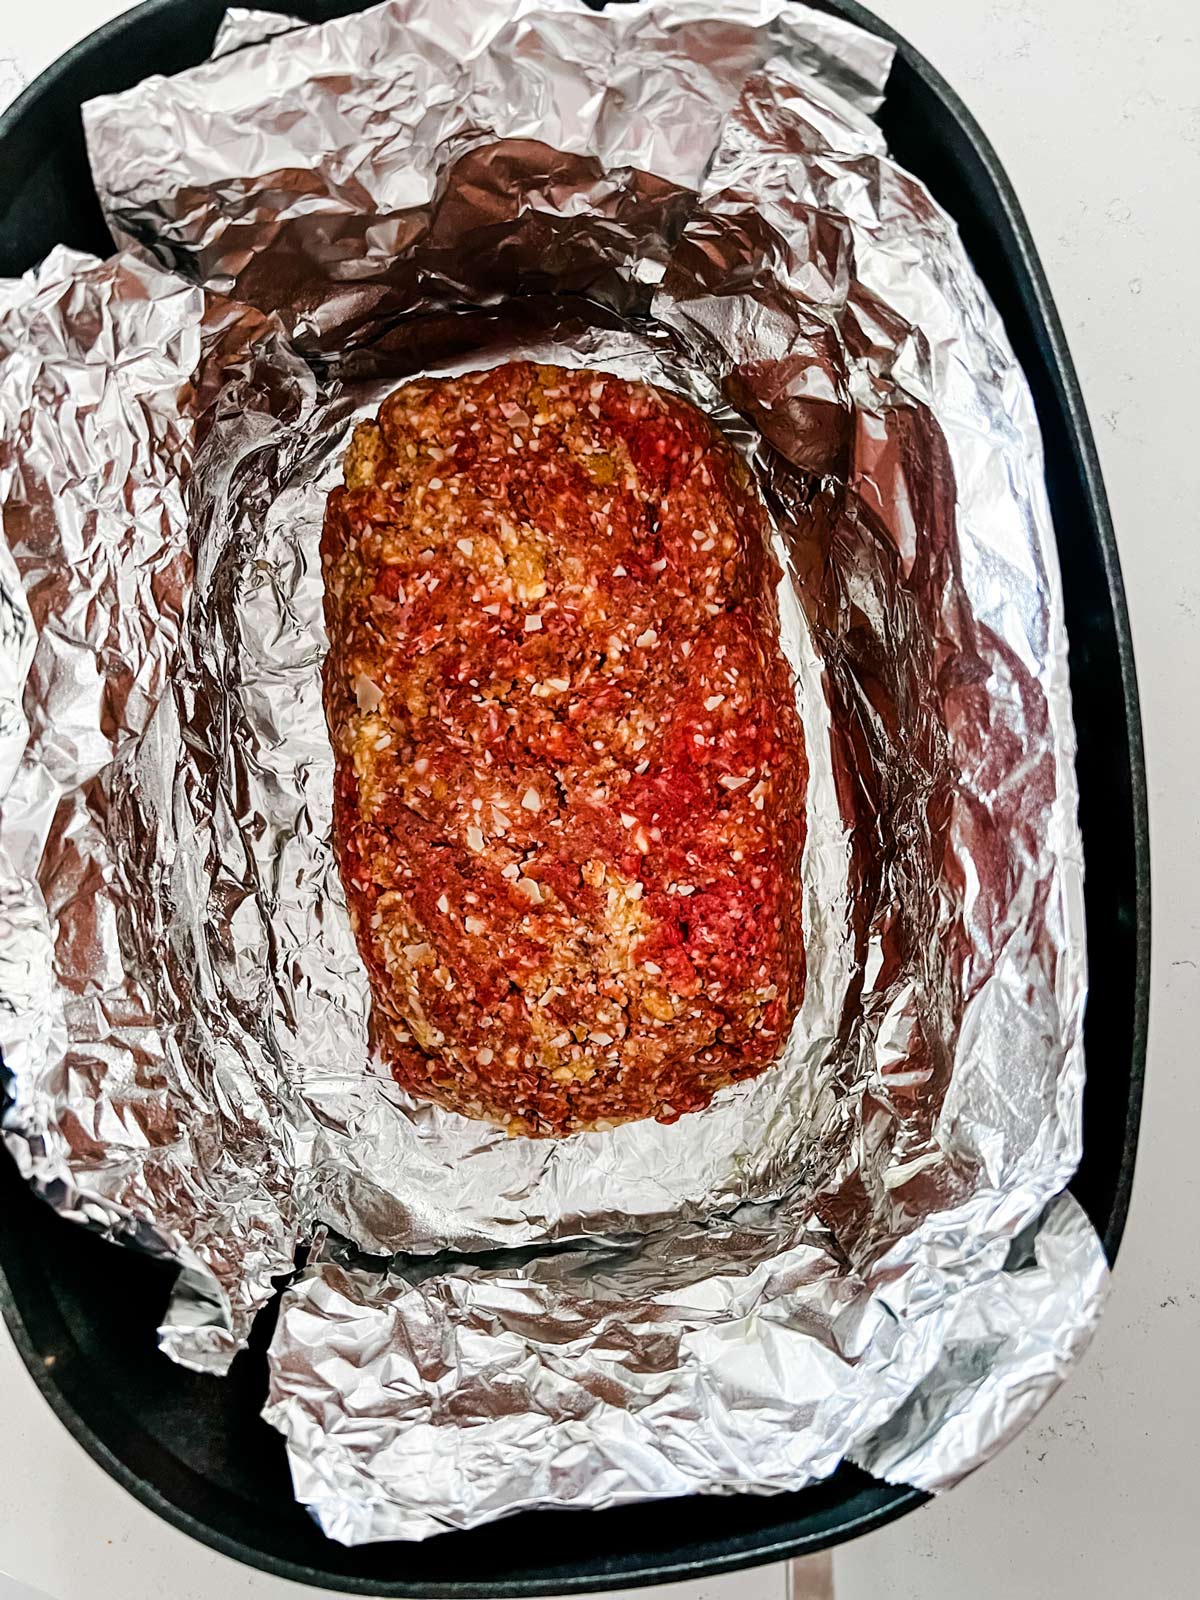 A meatloaf mixture in a slow cooker that has been lined with a foil sling.